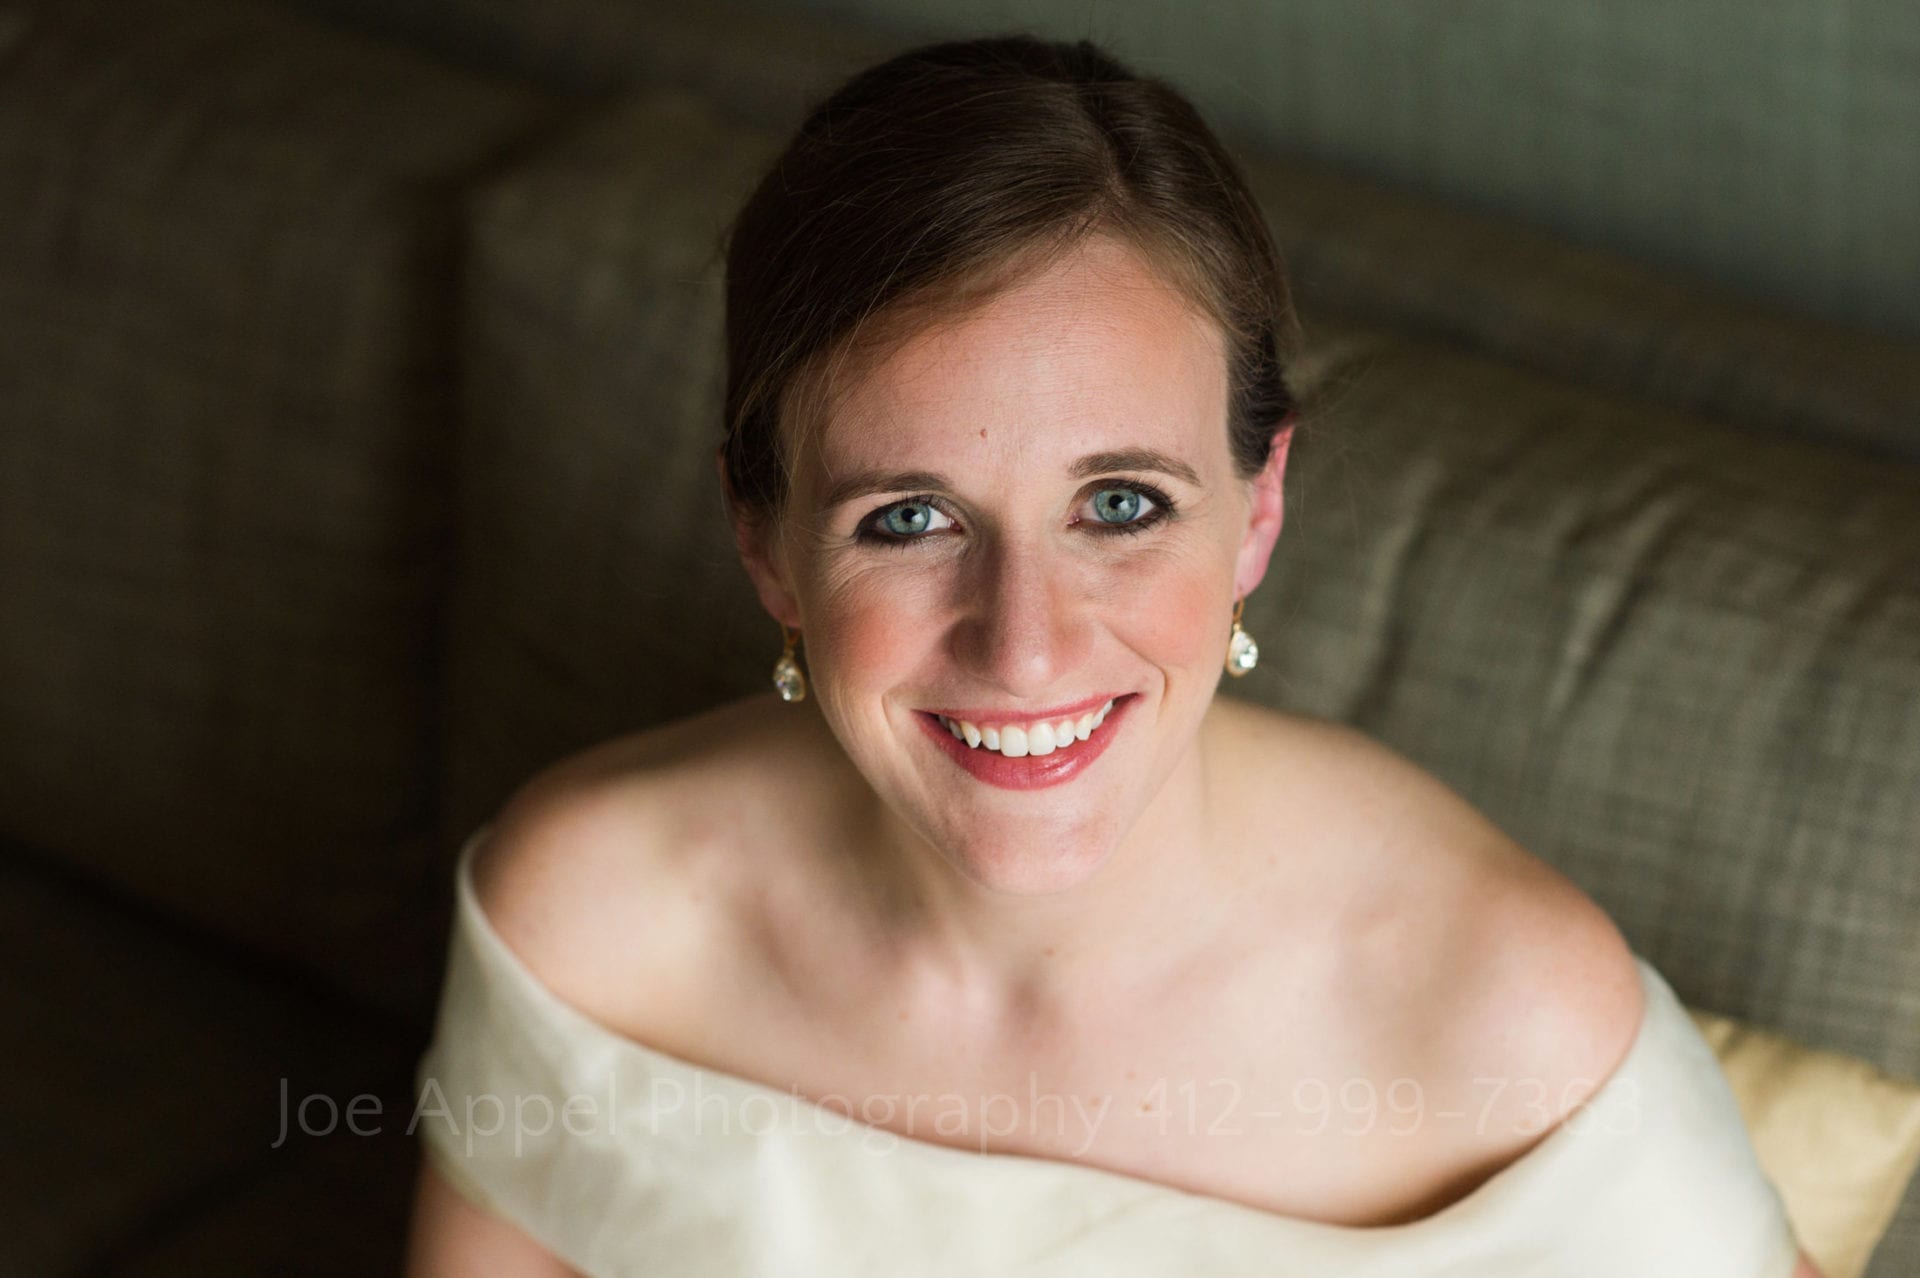 A smiling bride with striking blue eyes looks at the camera before heading to her Heinz History Center wedding.